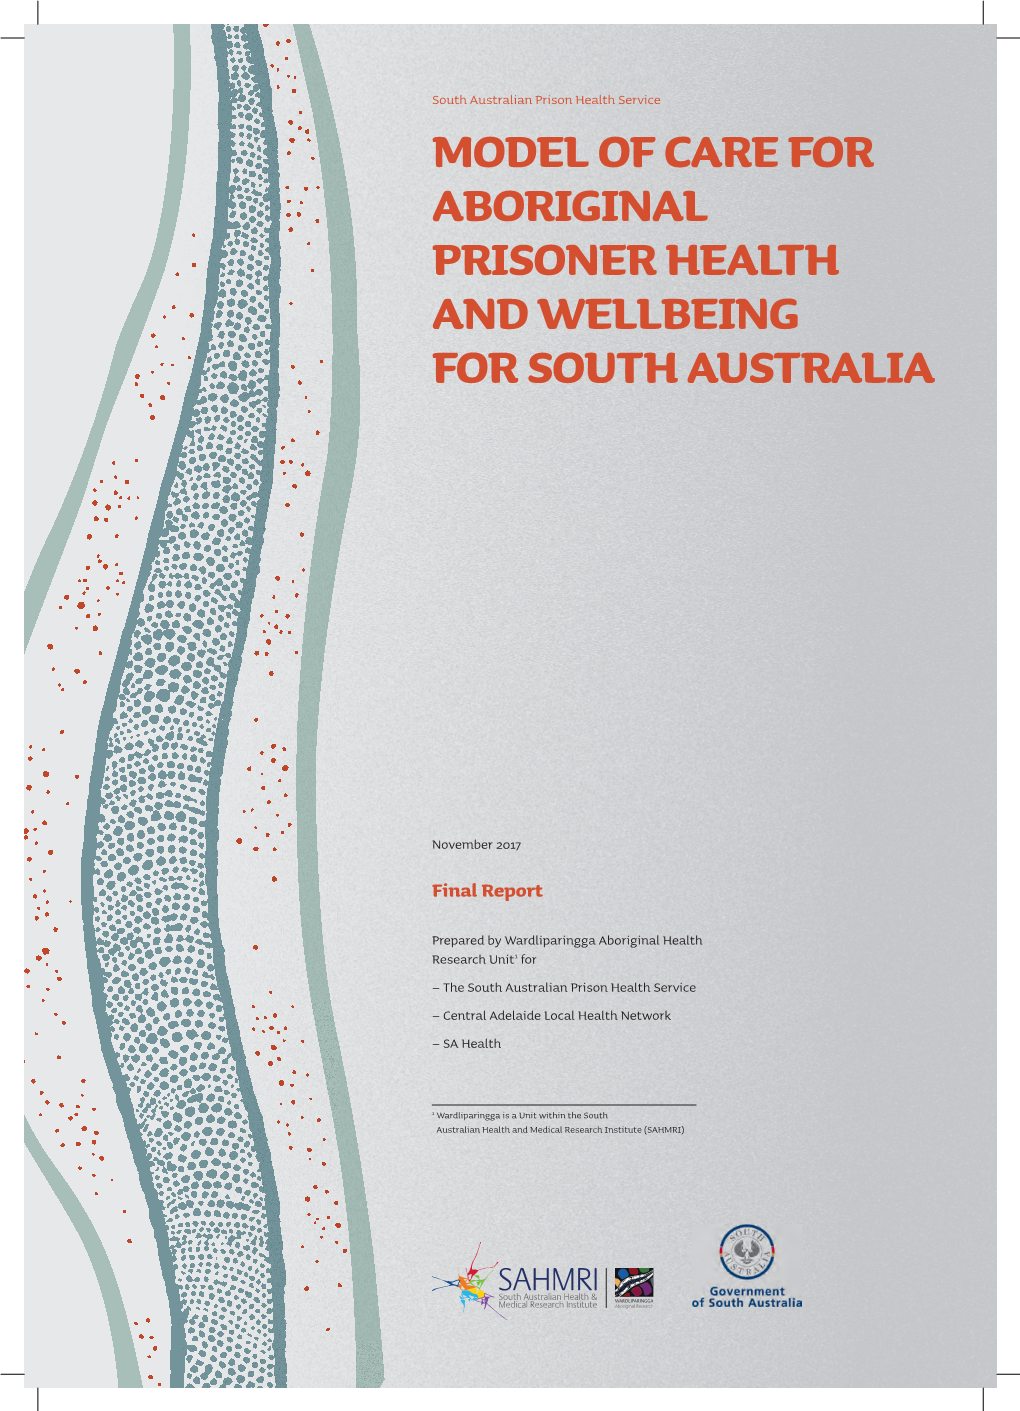 Model of Care for Aboriginal Prisoner Health & Wellbeing in South Australia